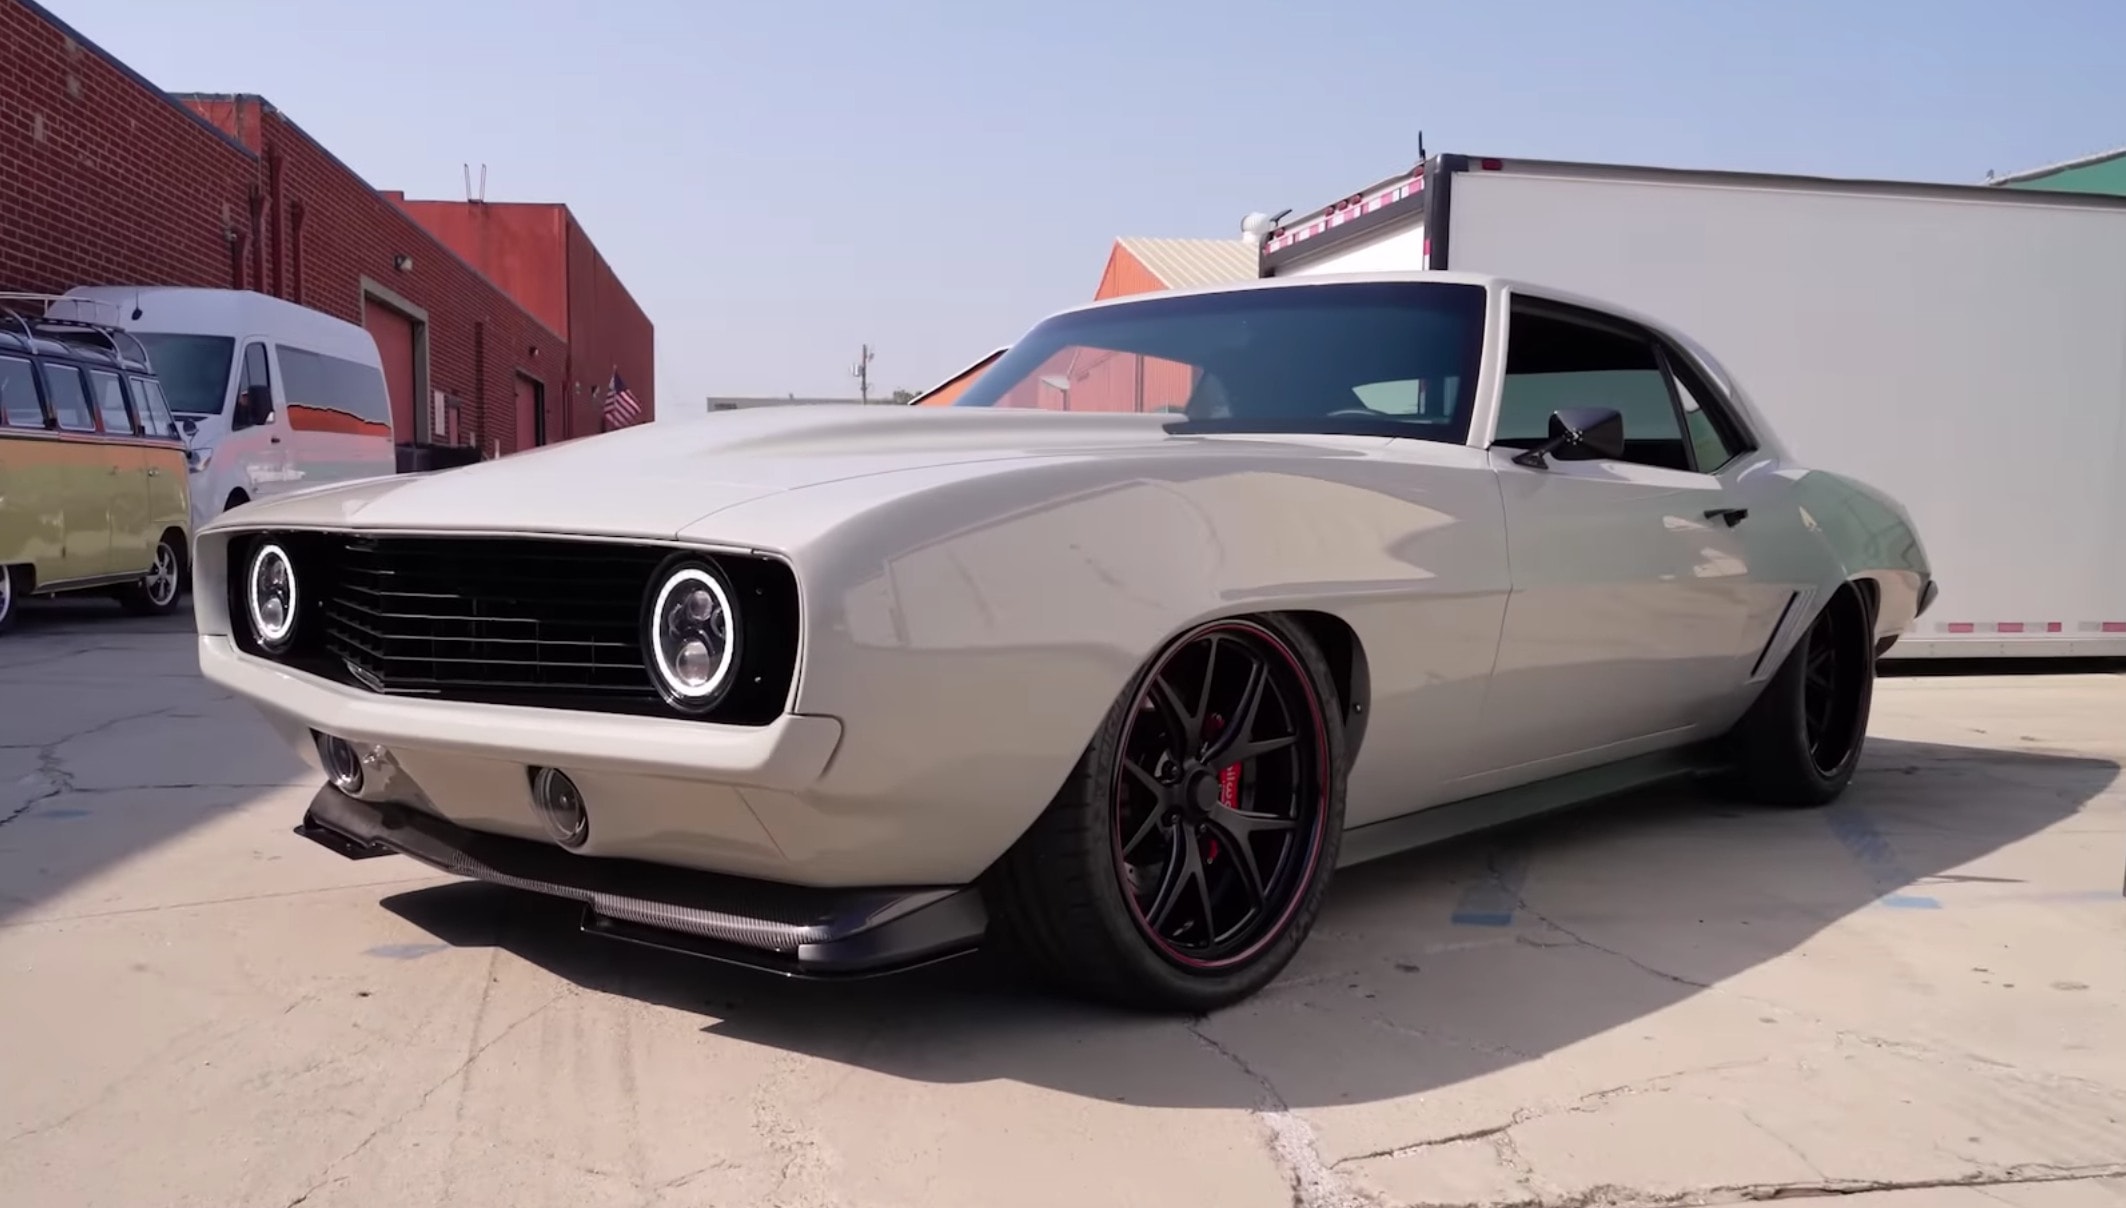 Knockout Slick Styled 700-HP LT4-Powered Chevy Camaro Just Ozzes Heart and  Passion - autoevolution